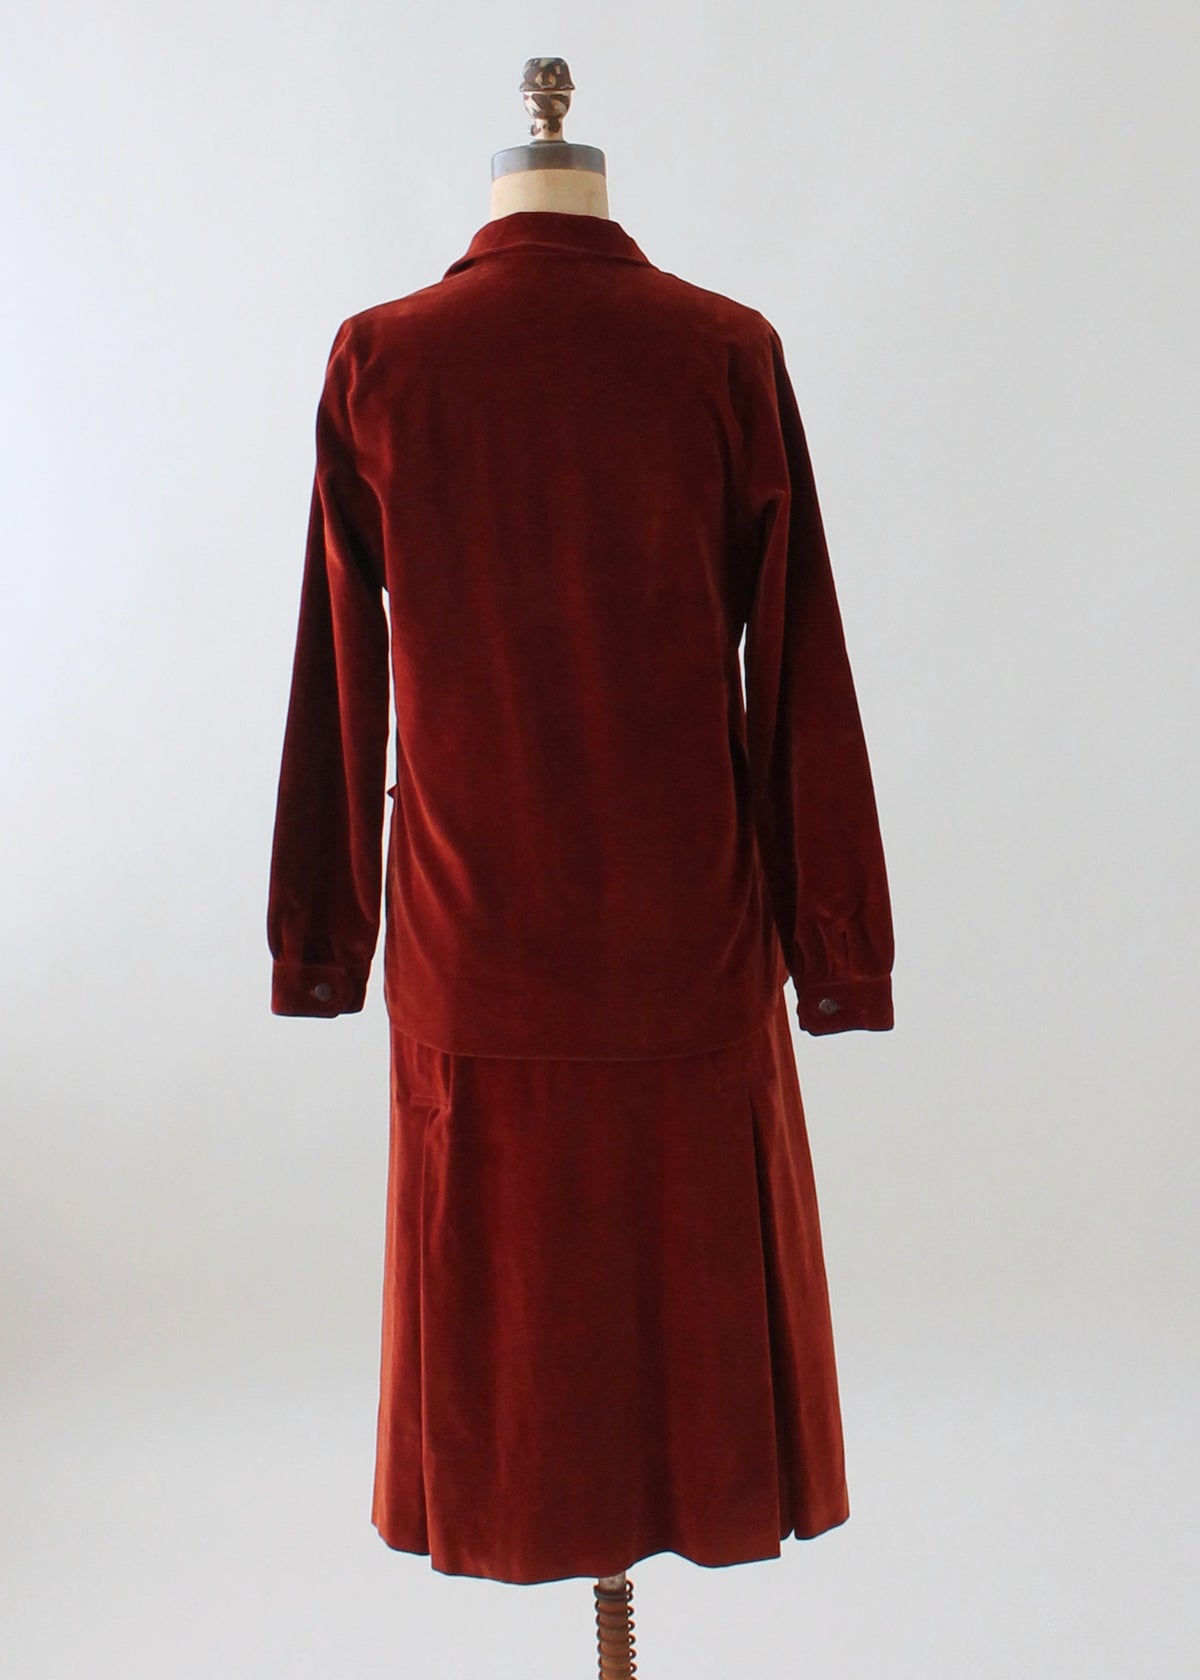 Vintage 1920s Chic Two Piece Velvet Day Dress - Raleigh Vintage